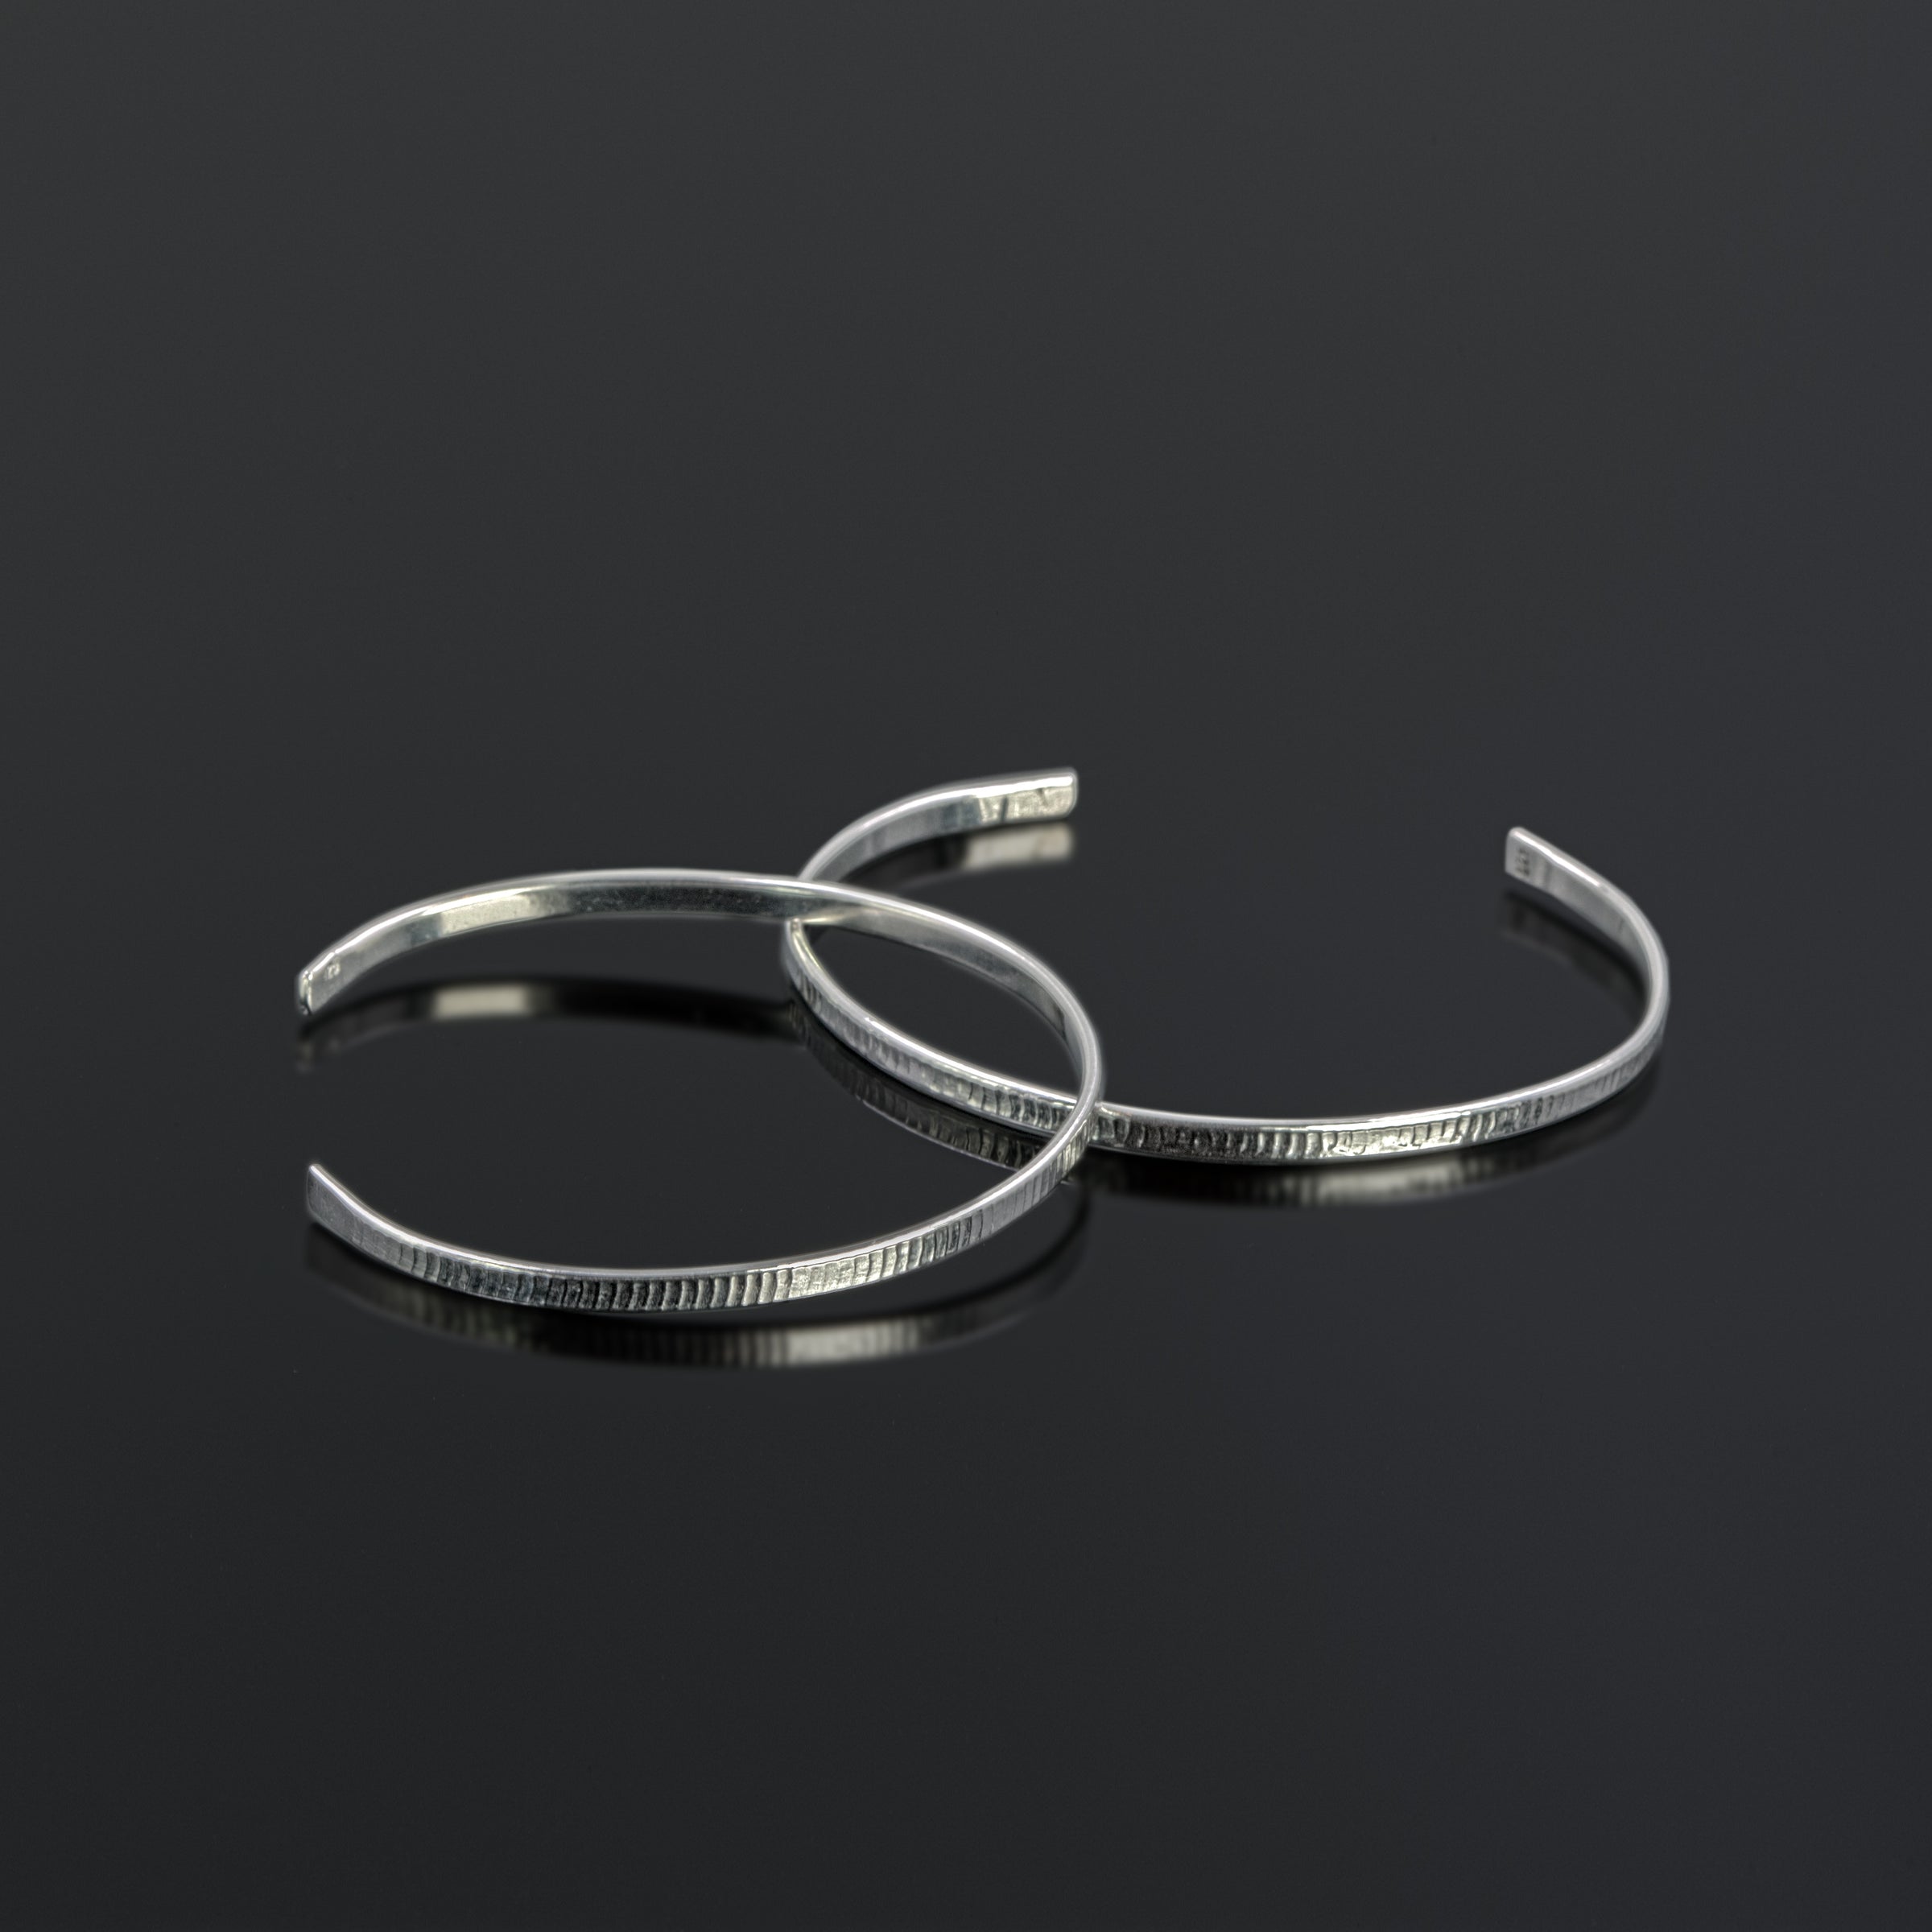 Staccato cuff bracelets in Argentium by Rouaida.